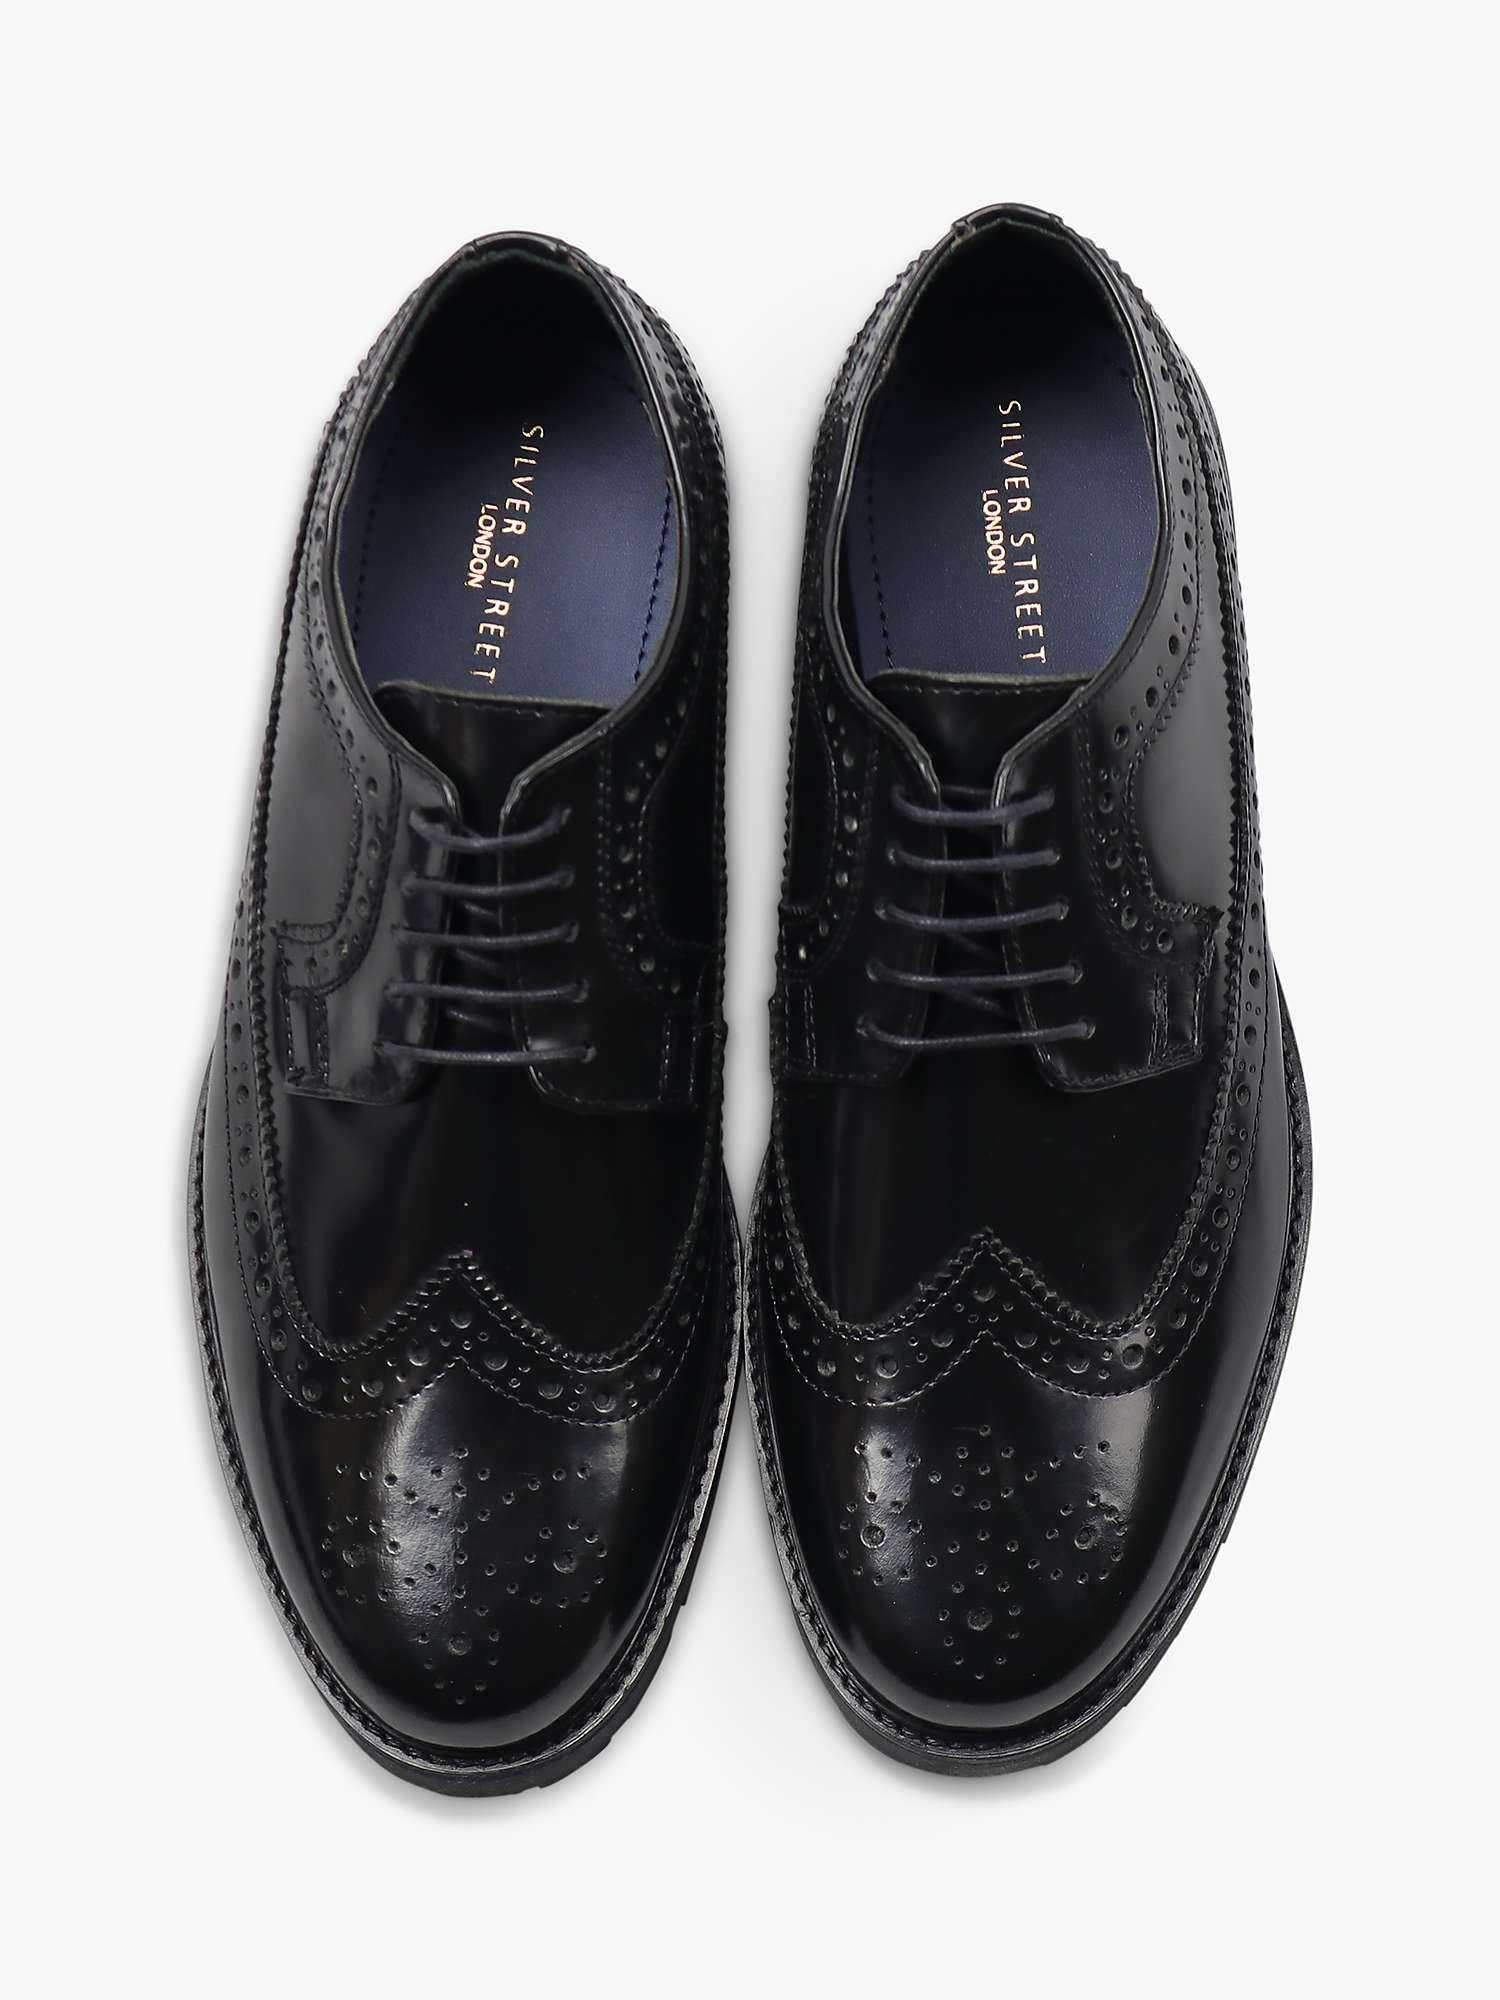 Buy Silver Street London Croxley Leather Formal Brogue Shoes, Black Online at johnlewis.com